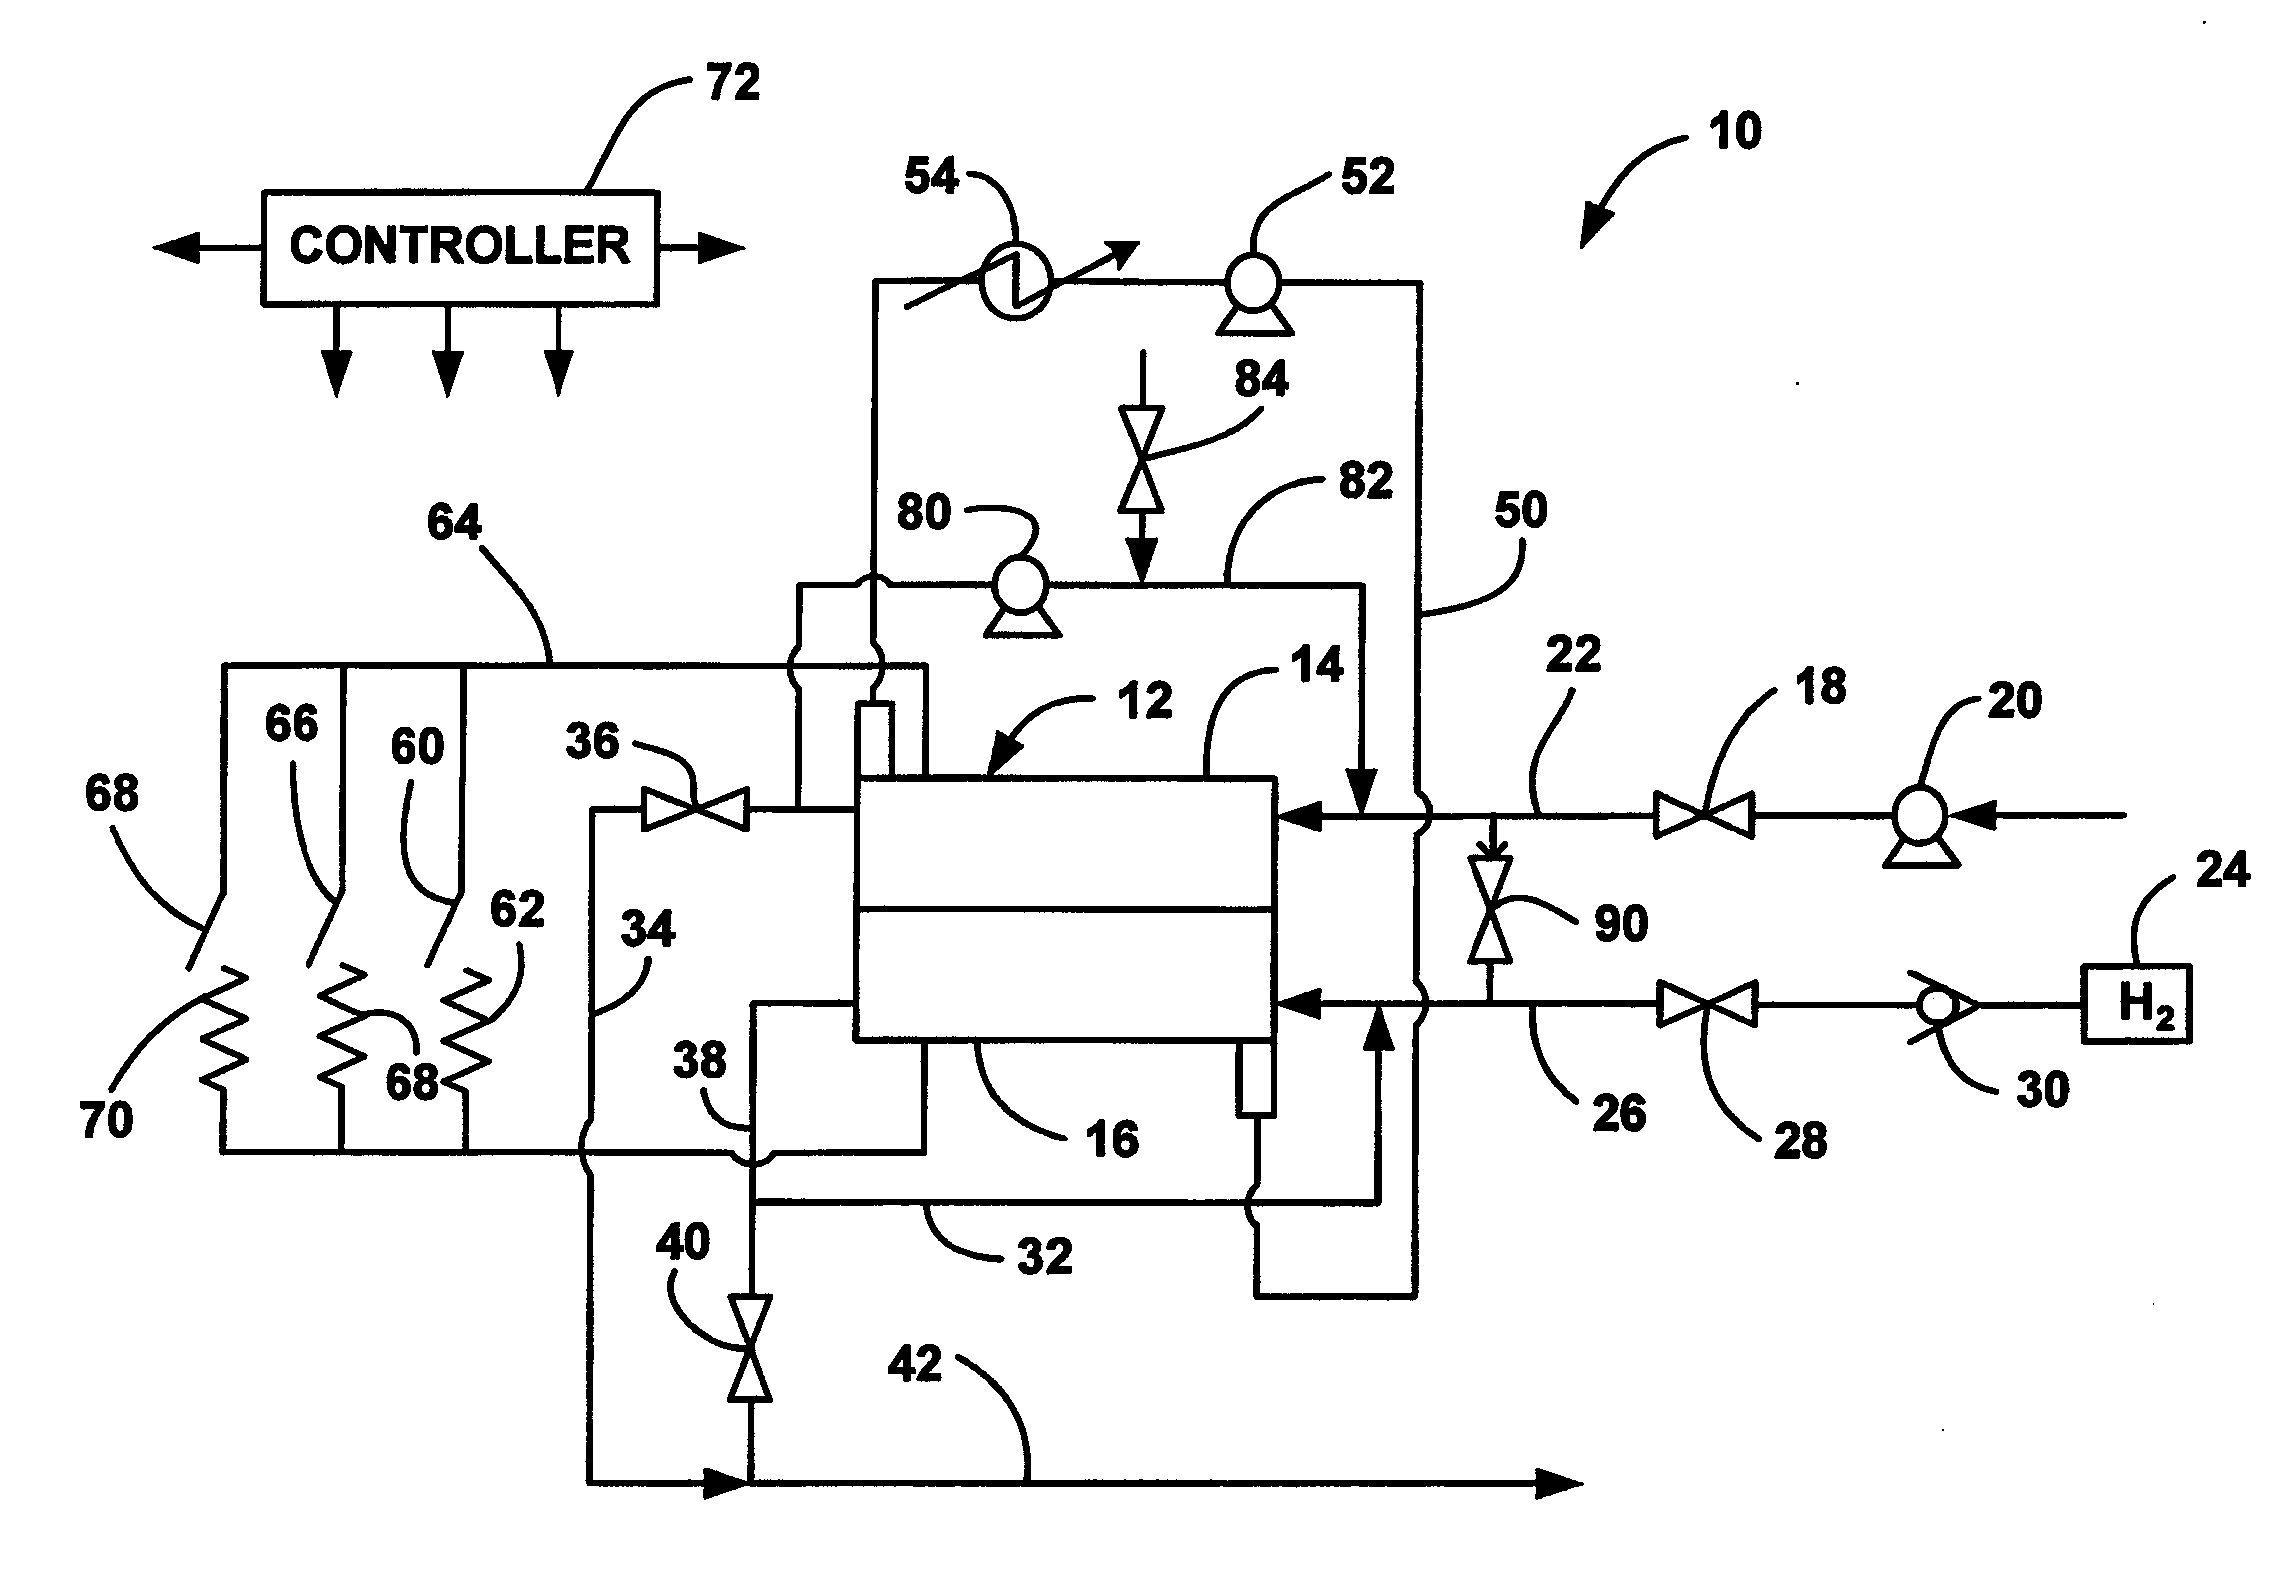 Method for mitigating cell degradation due to startup and shutdown via cathode re-circulation combined with electrical shorting of stack